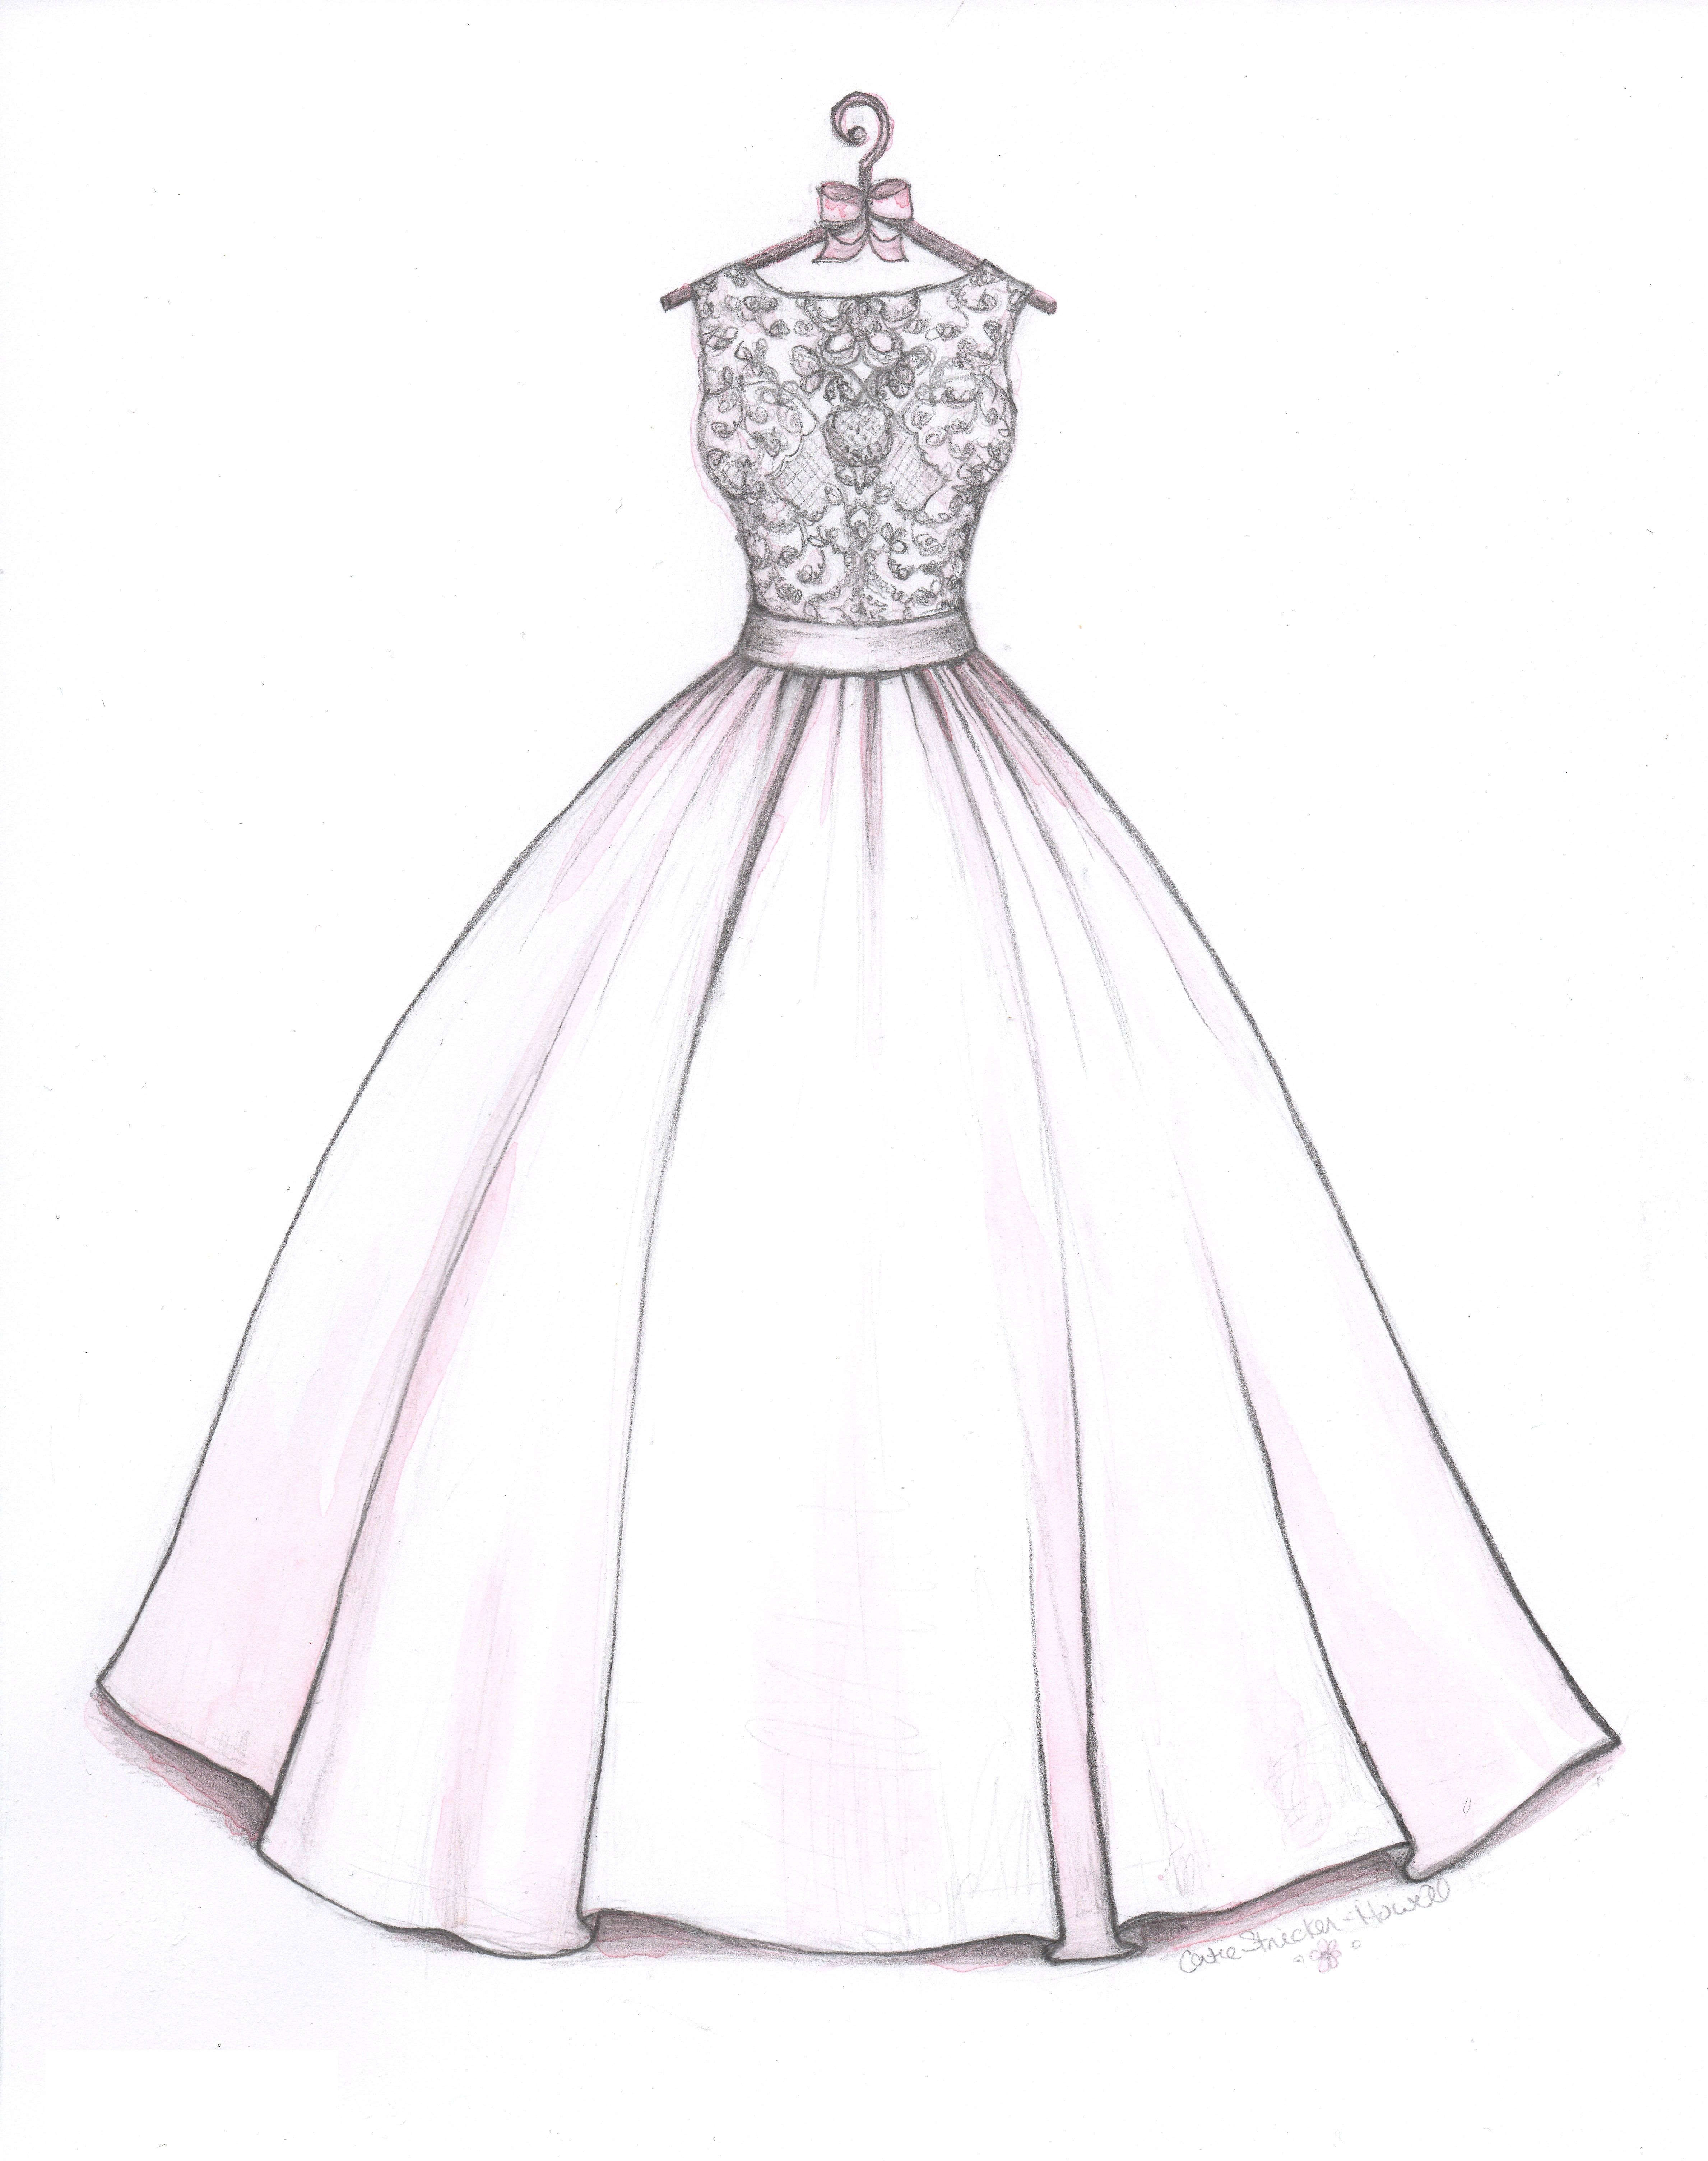 Pretty Ball Gown Dress Coloring Pages Pdf - Ball Gown Dress Coloring Pages